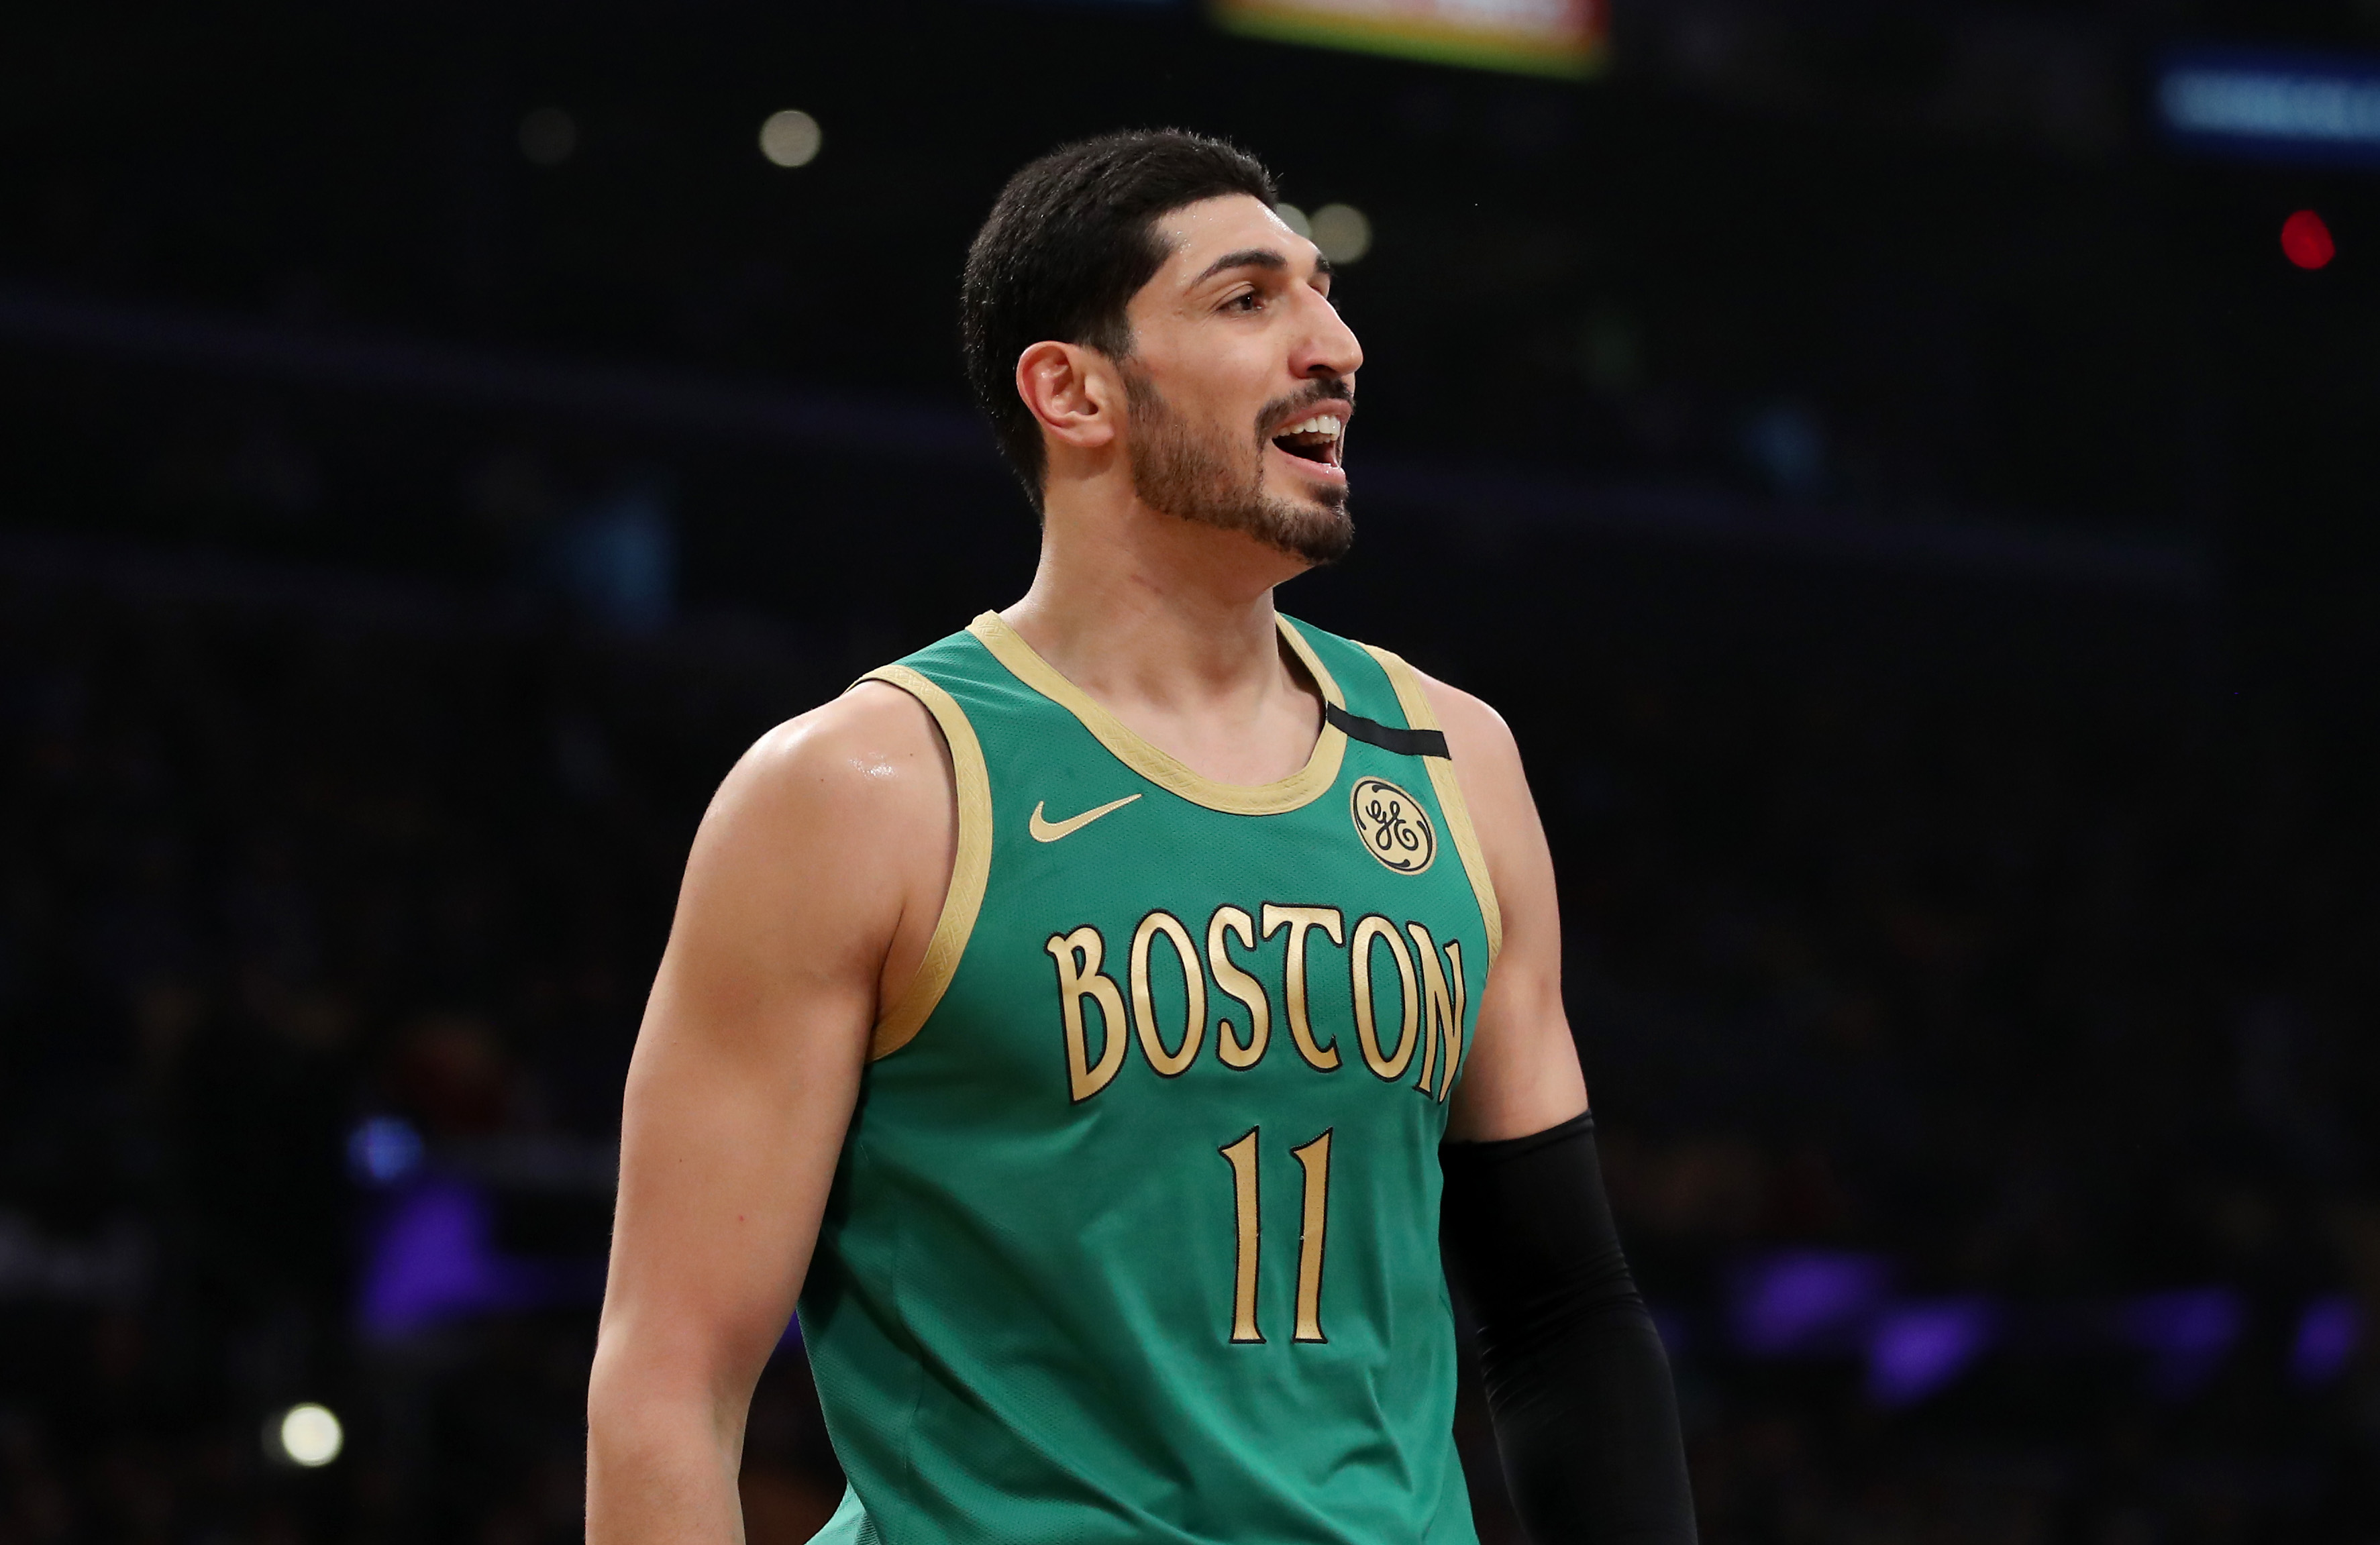 I could cry': Former OKC Thunder player Enes Kanter says father released  from Turkish prison